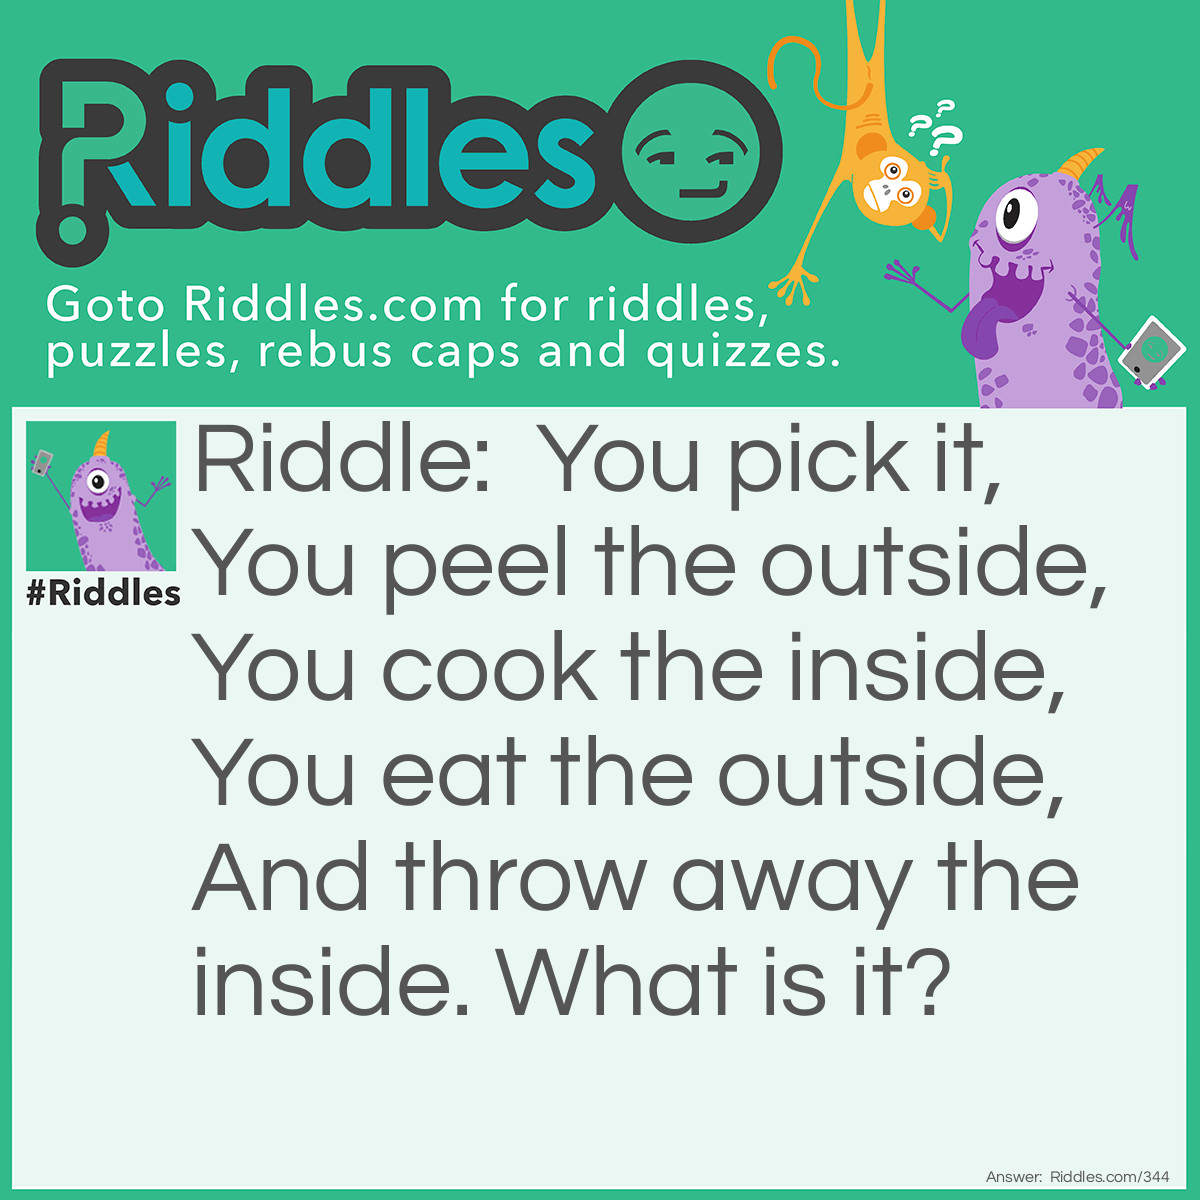 Riddle: You pick it, You peel the outside, You cook the inside, You eat the outside, And throw away the inside. What is it? Answer: An ear of corn.